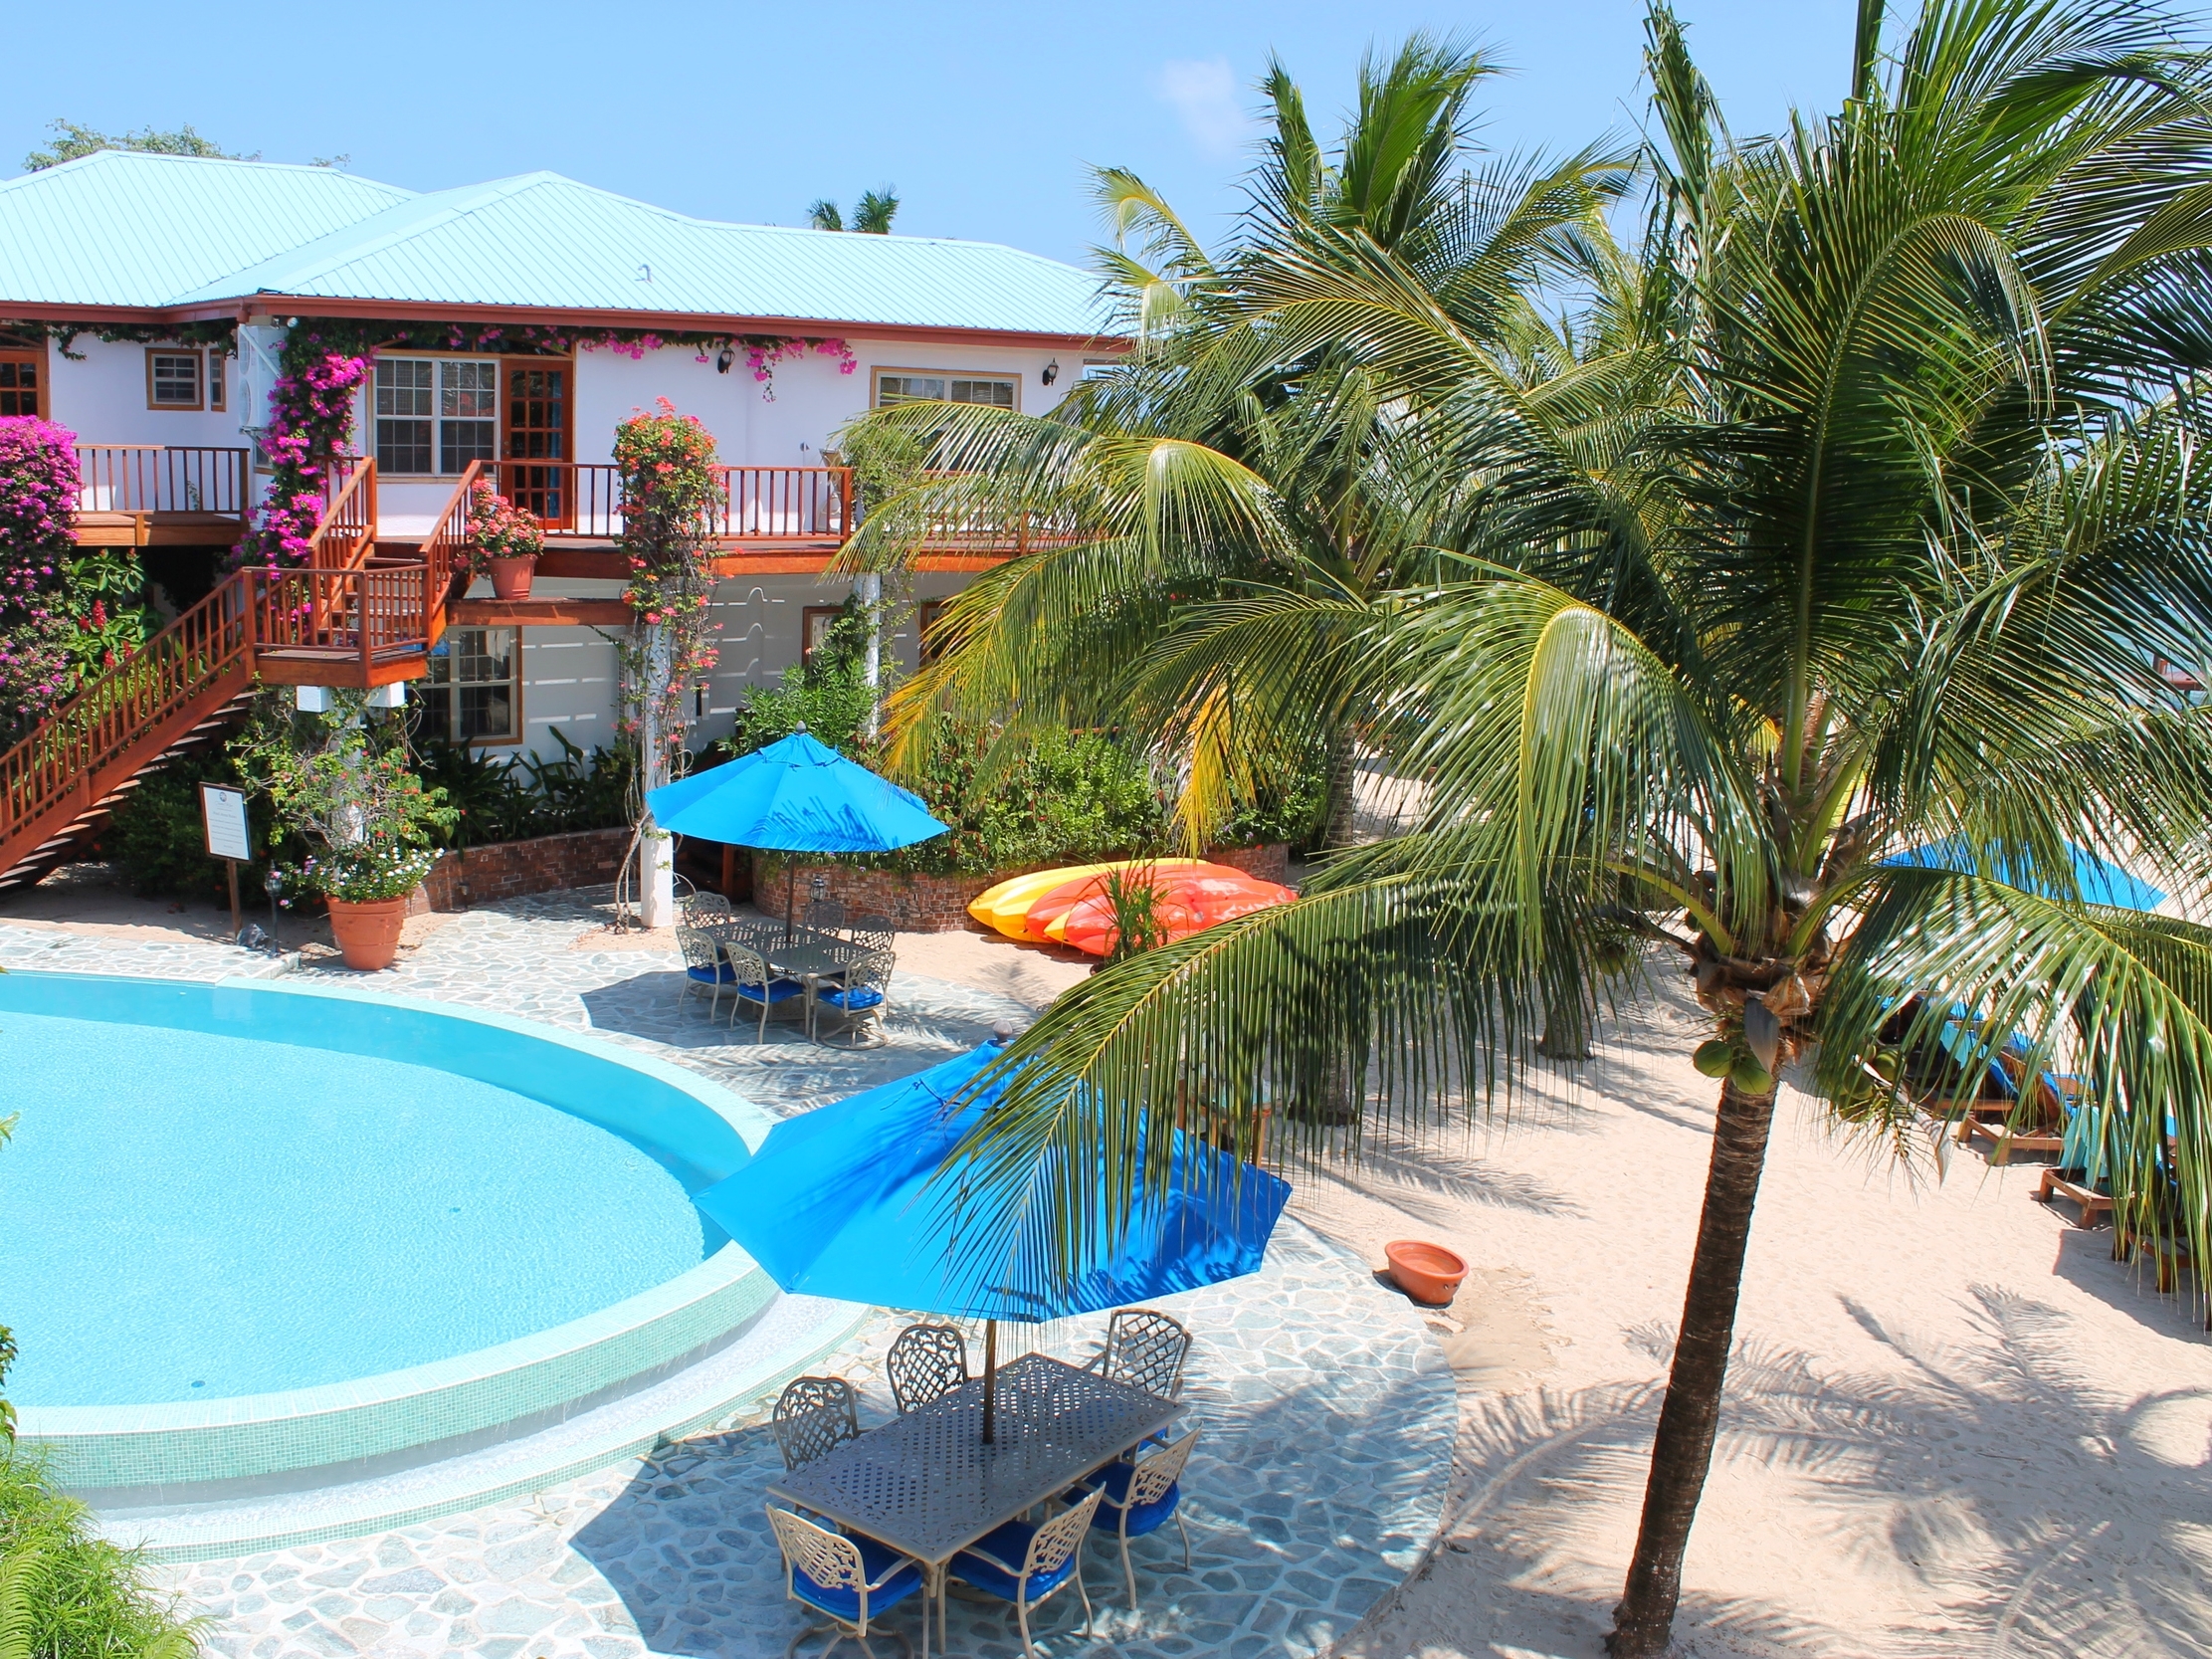 The Chabil Mar Villas offer refined comforts in a gorgeous garden setting right on the beach